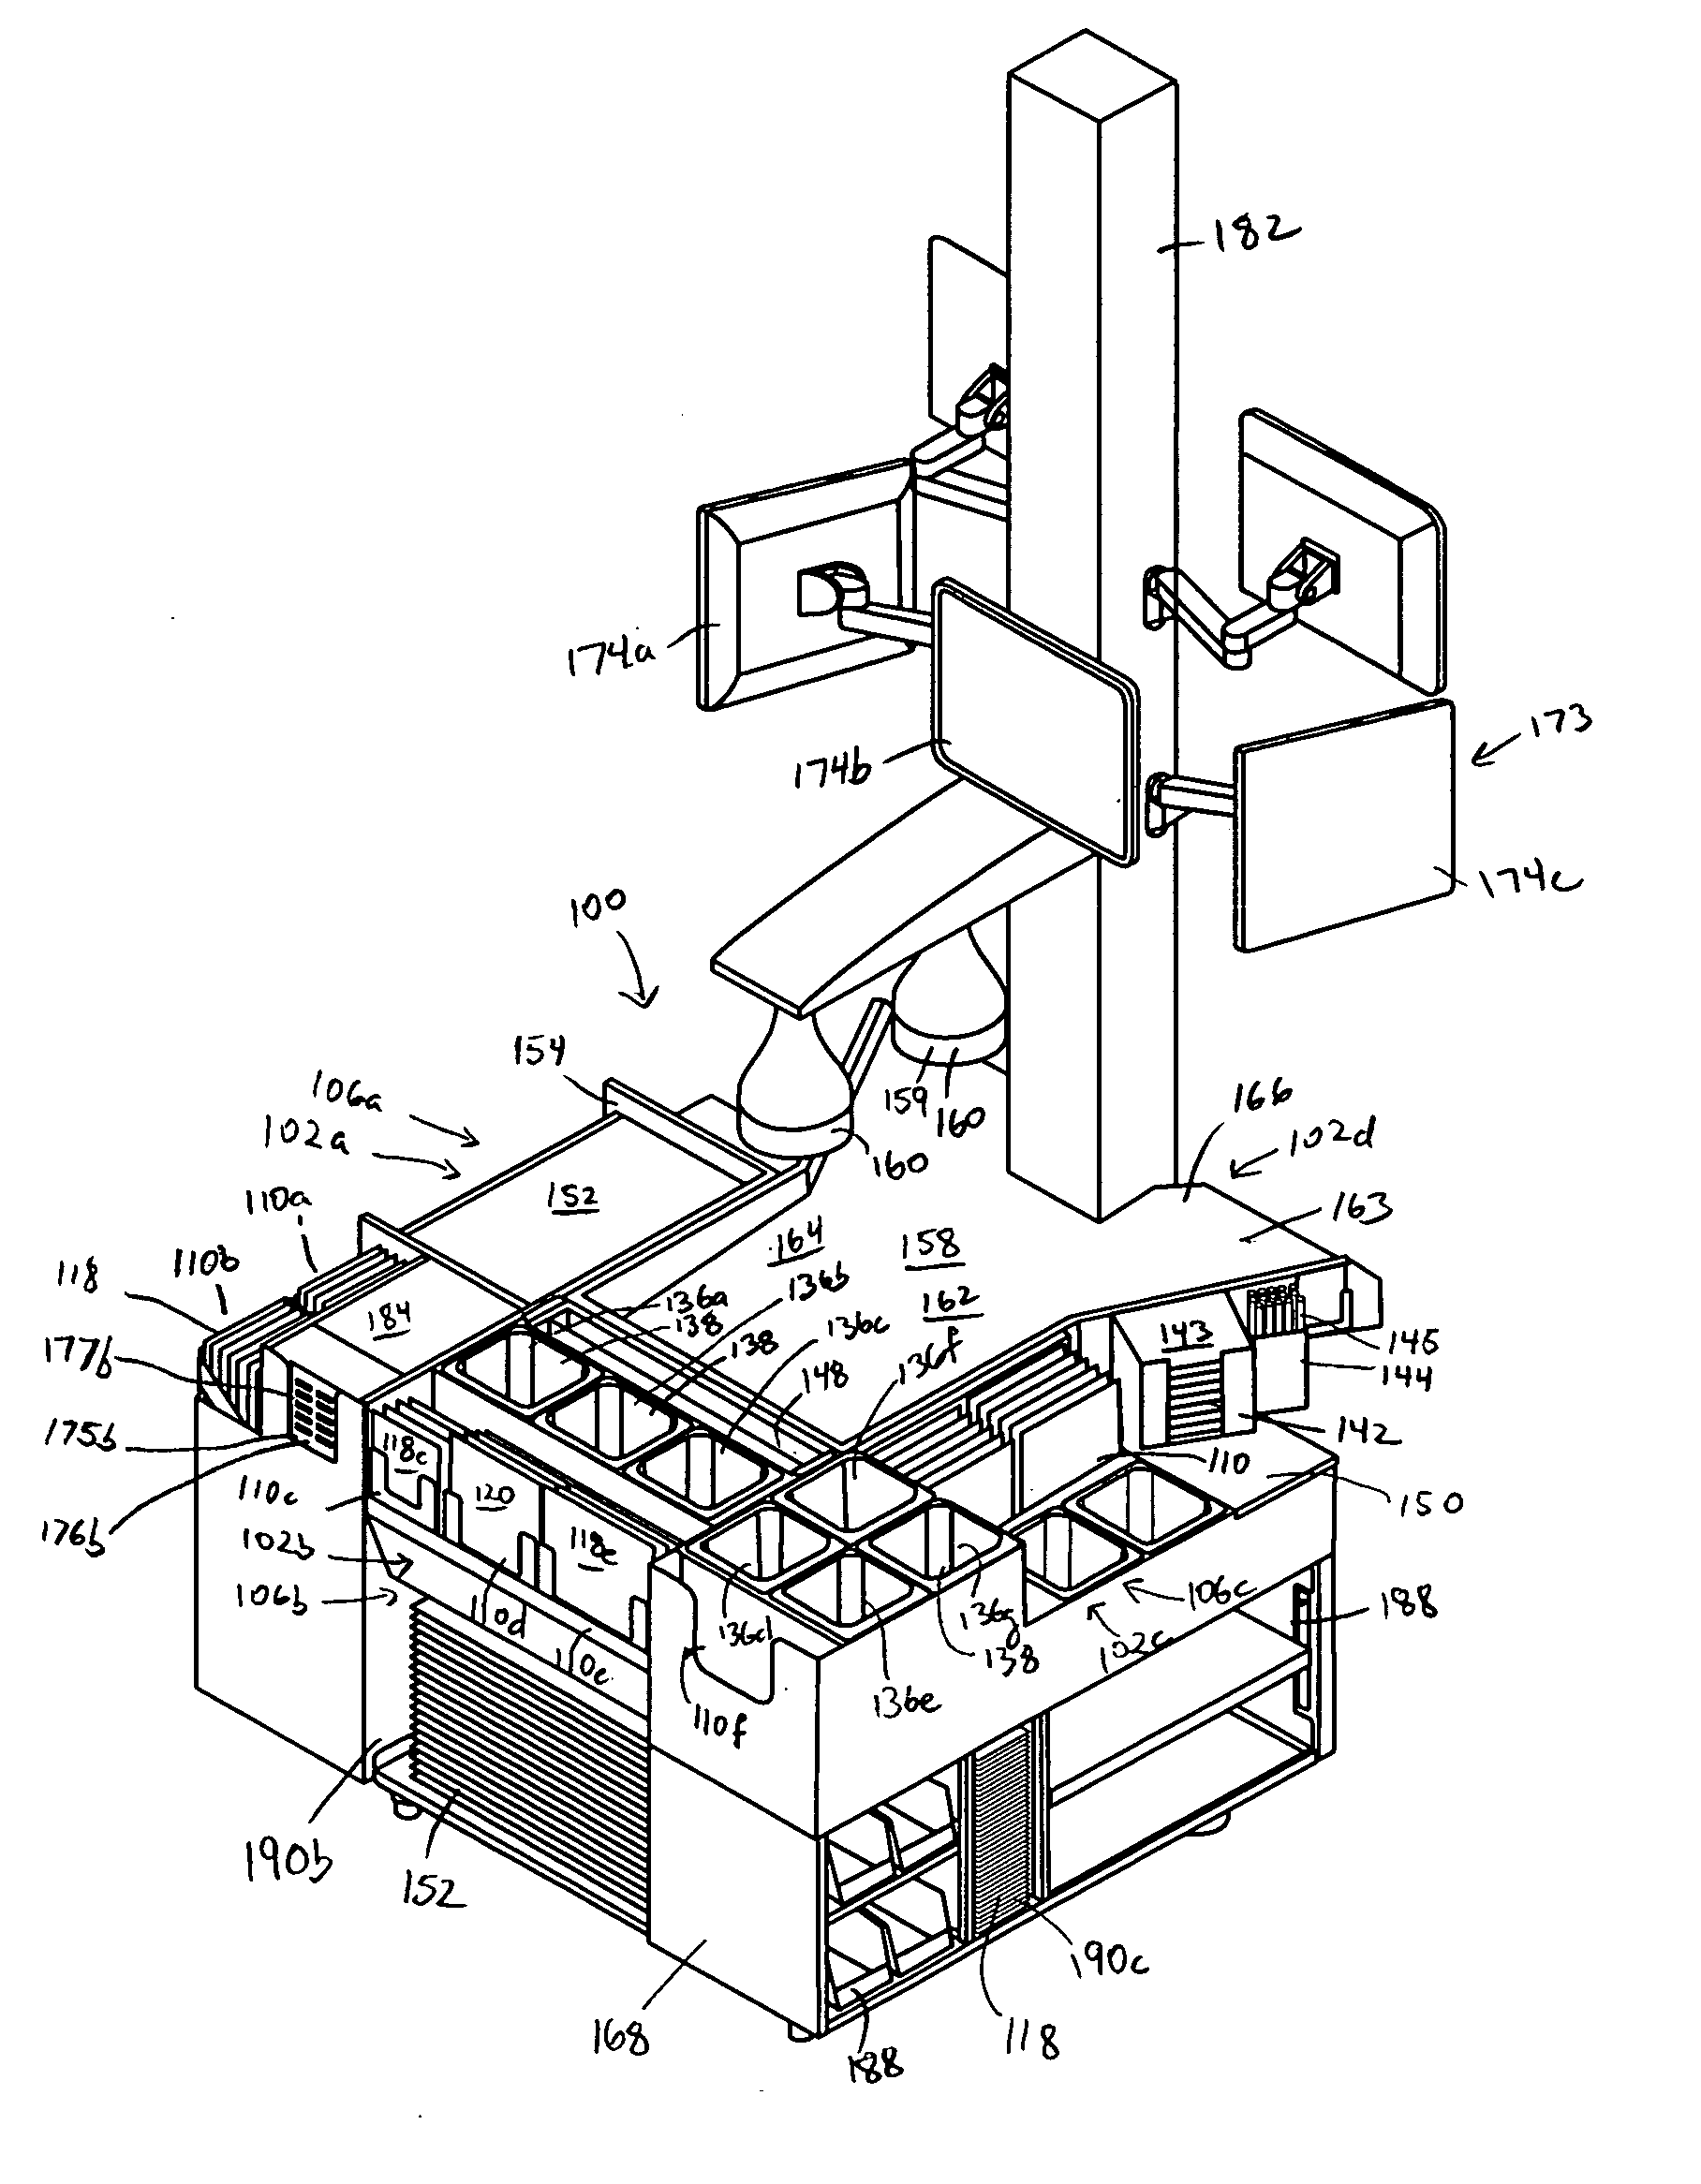 Device, system and method for assembling food orders